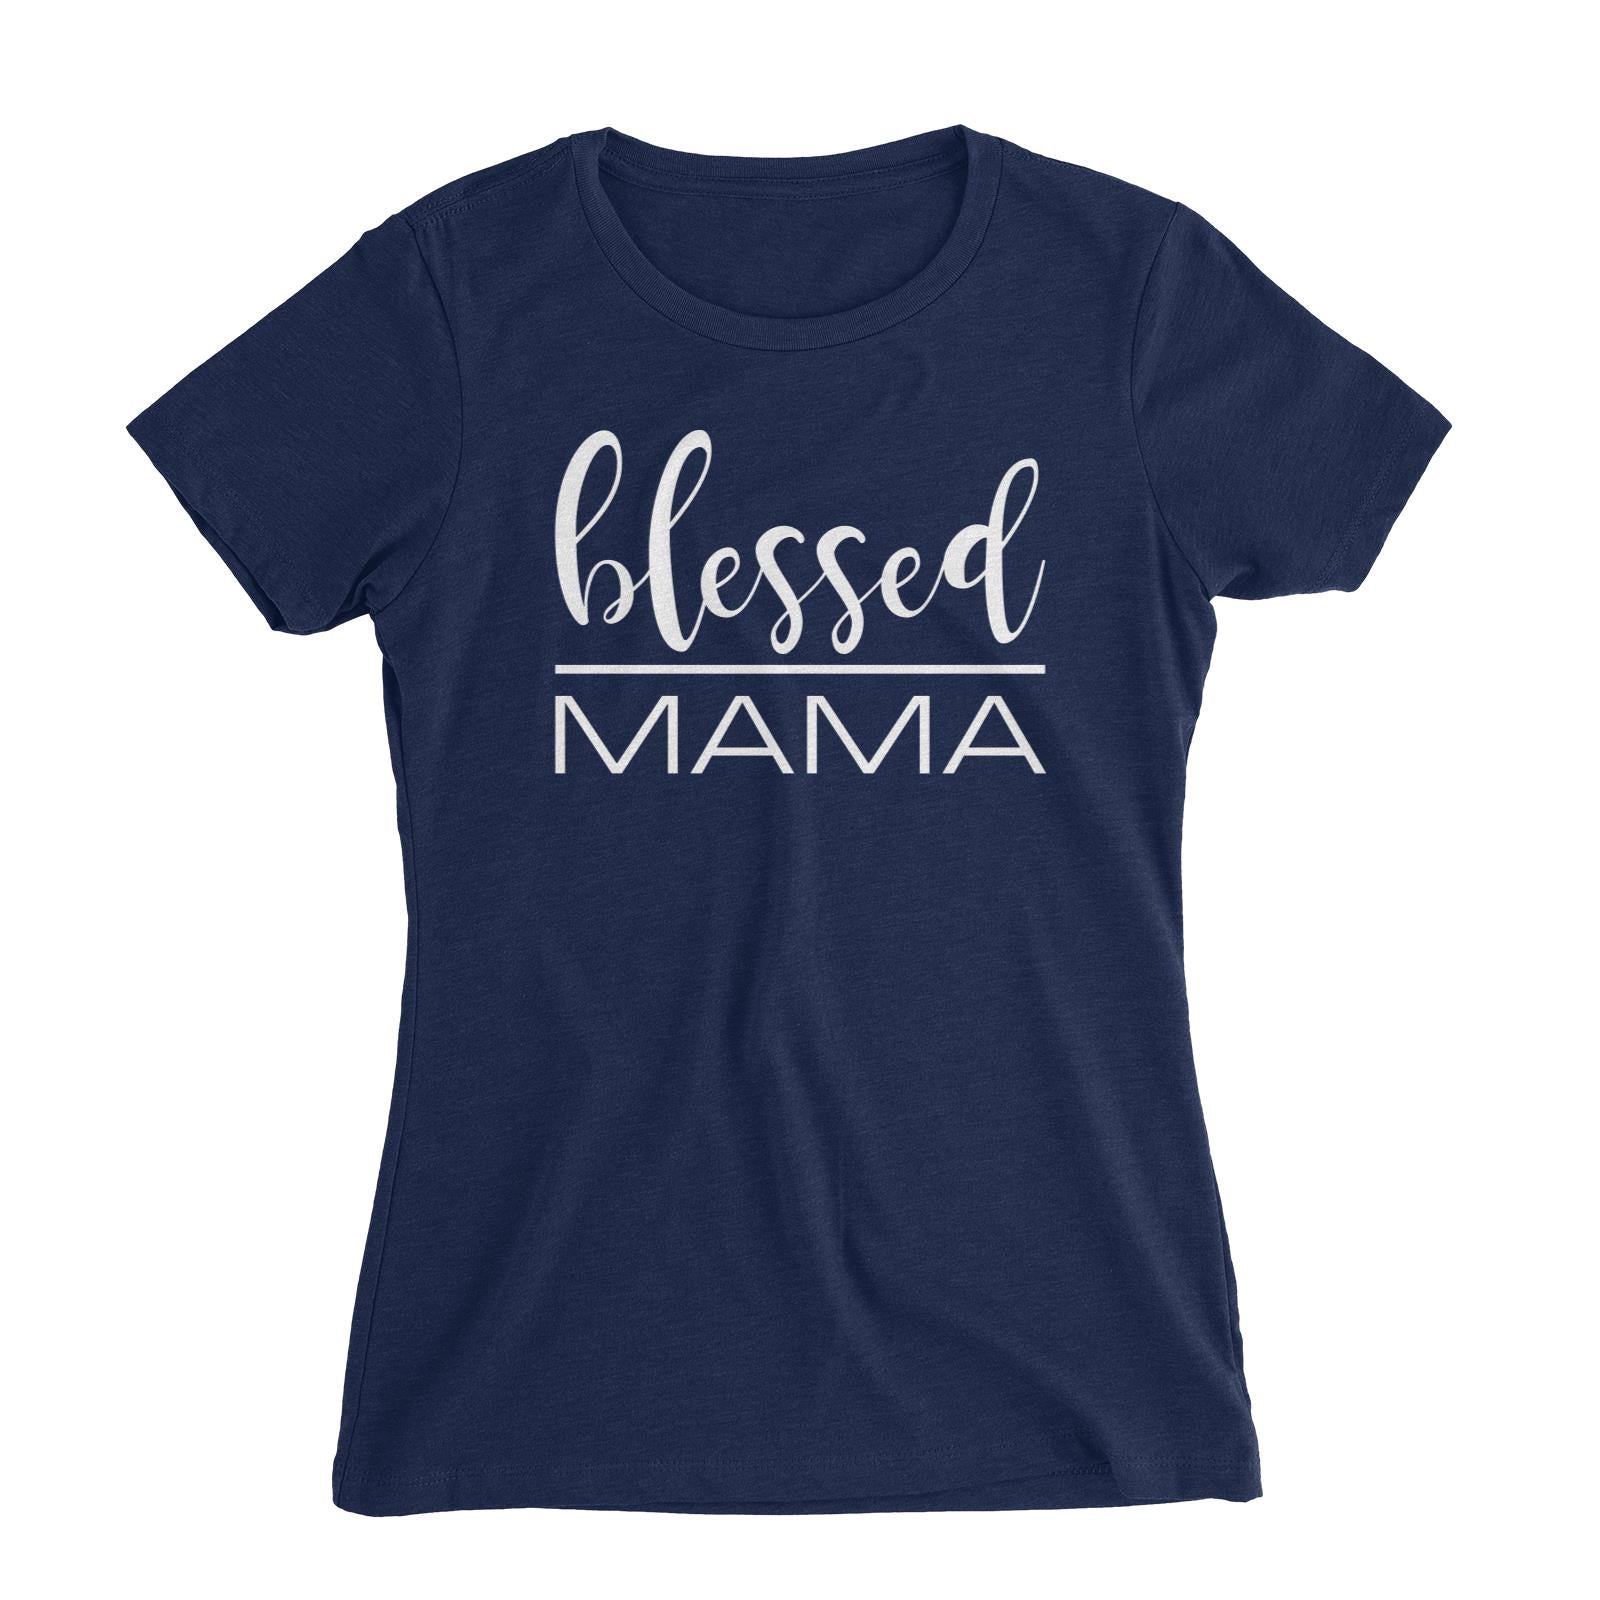 Blessed Mama Women's Slim Fit T-Shirt Matching Family Blessing Love